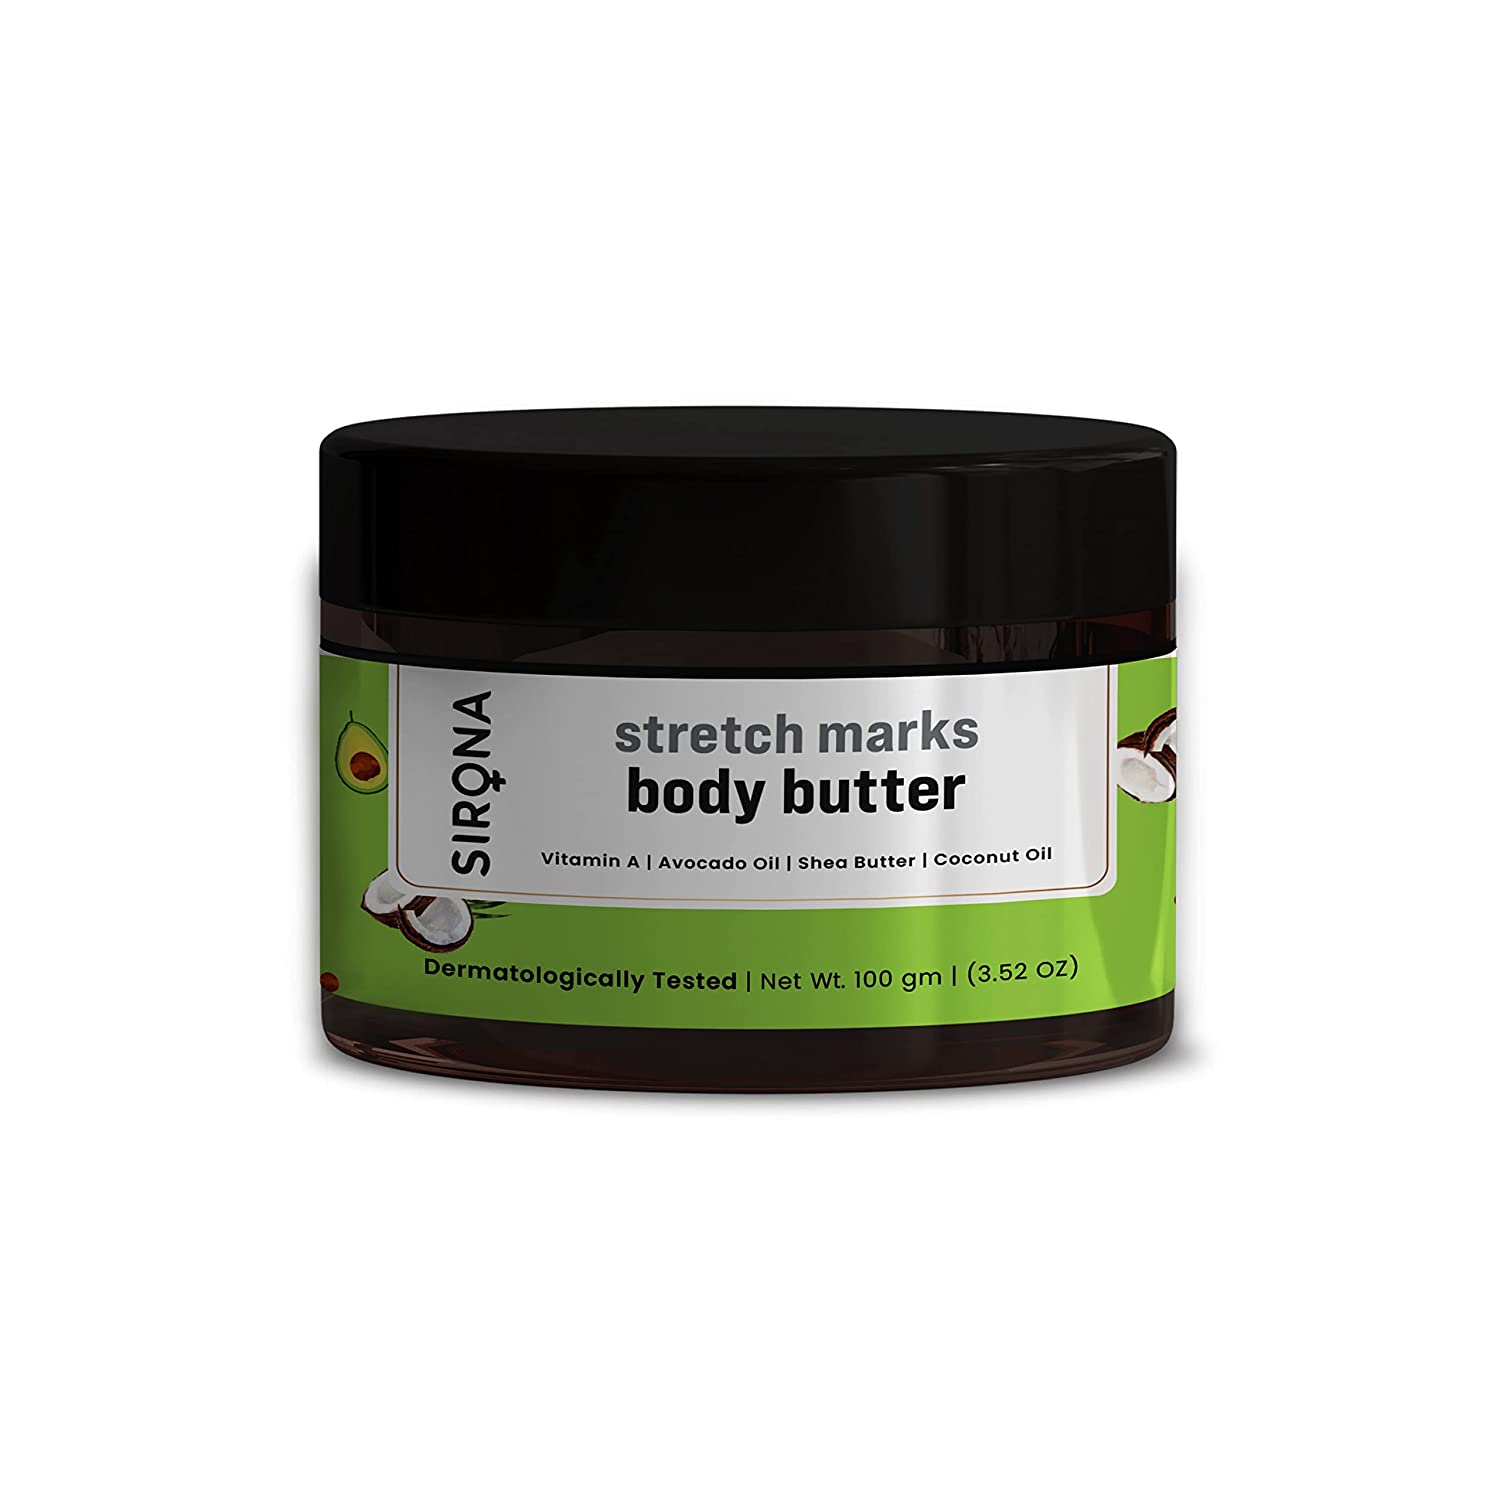 Sirona Natural Stretch Marks Body Butter Cream for Men & Women, Soothes Itchy Skin & Prevents Moisturization (100gm)